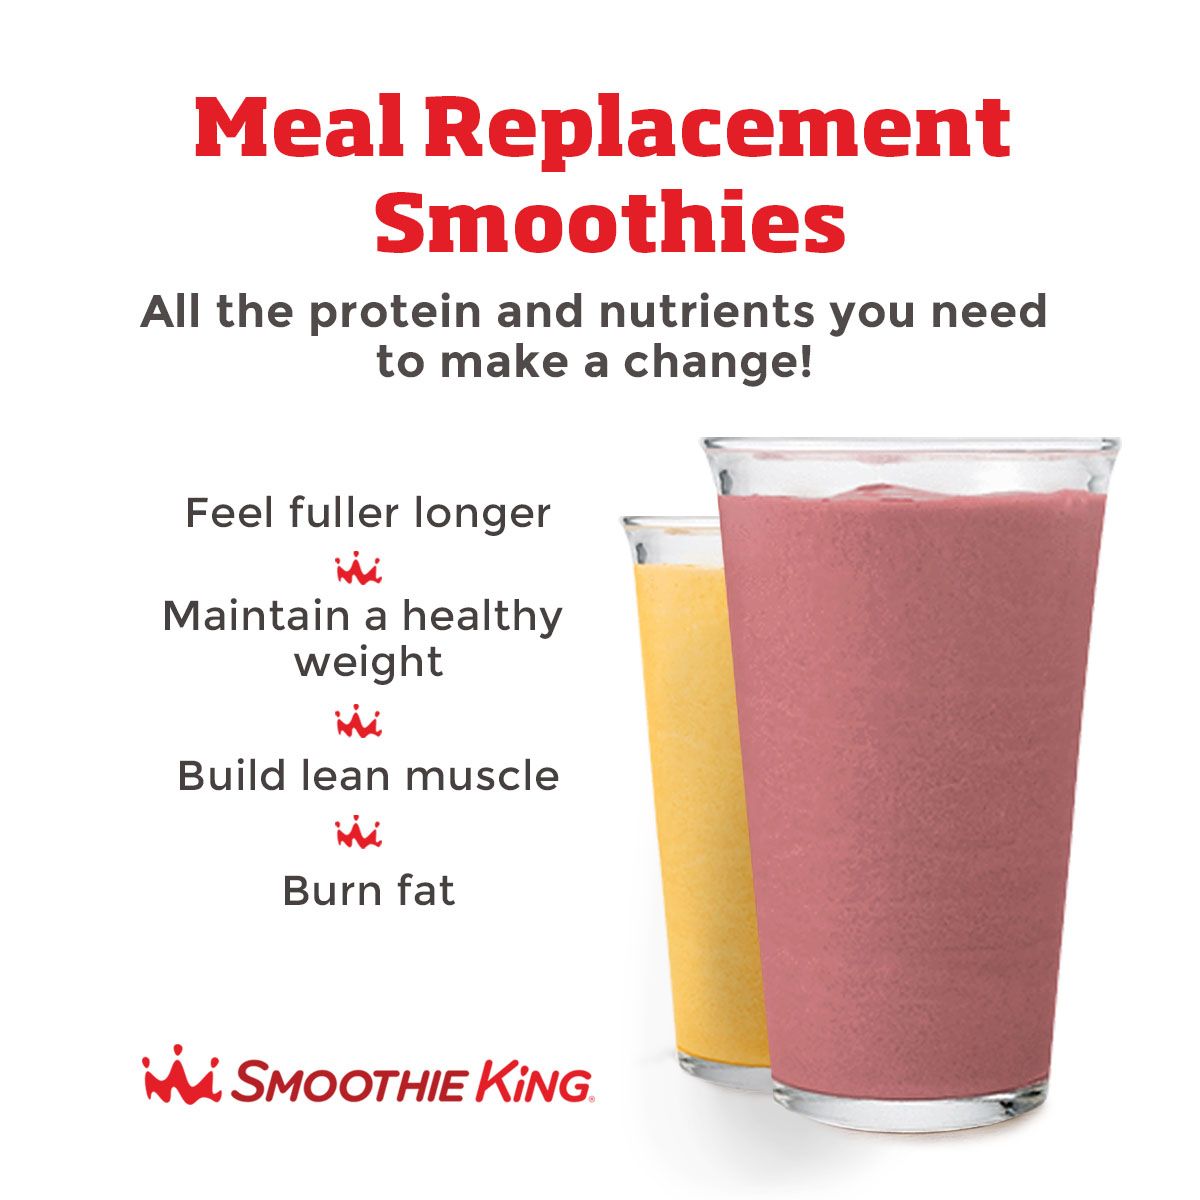 We Have 11 Meal Replacement Smoothies In 24 Different